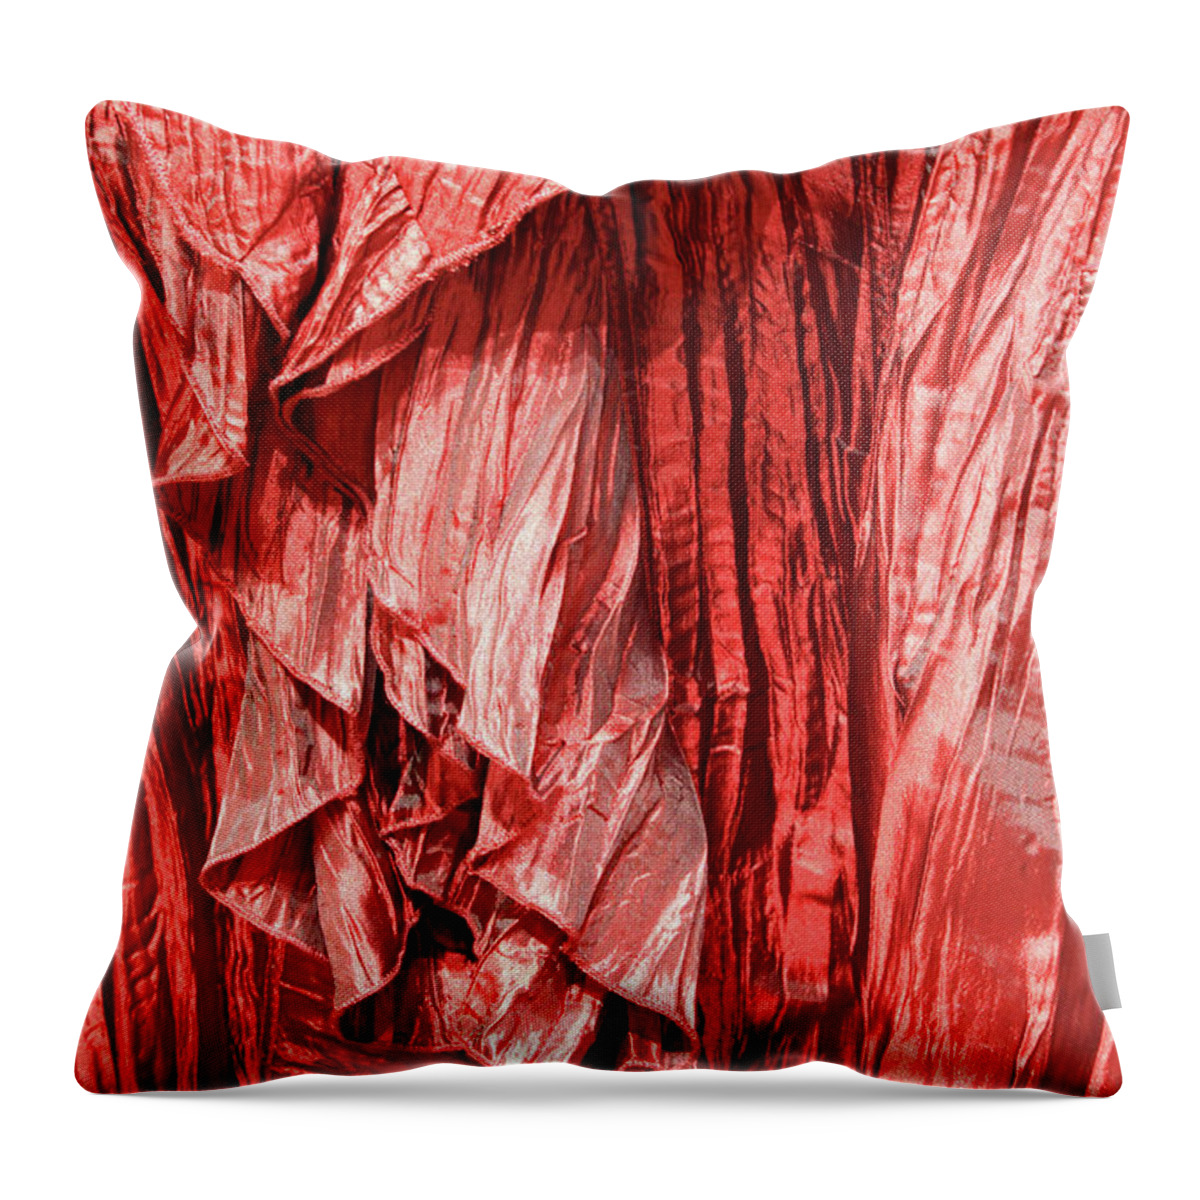 Ruffled Throw Pillow featuring the photograph A Ruffled Blouse by Cora Wandel